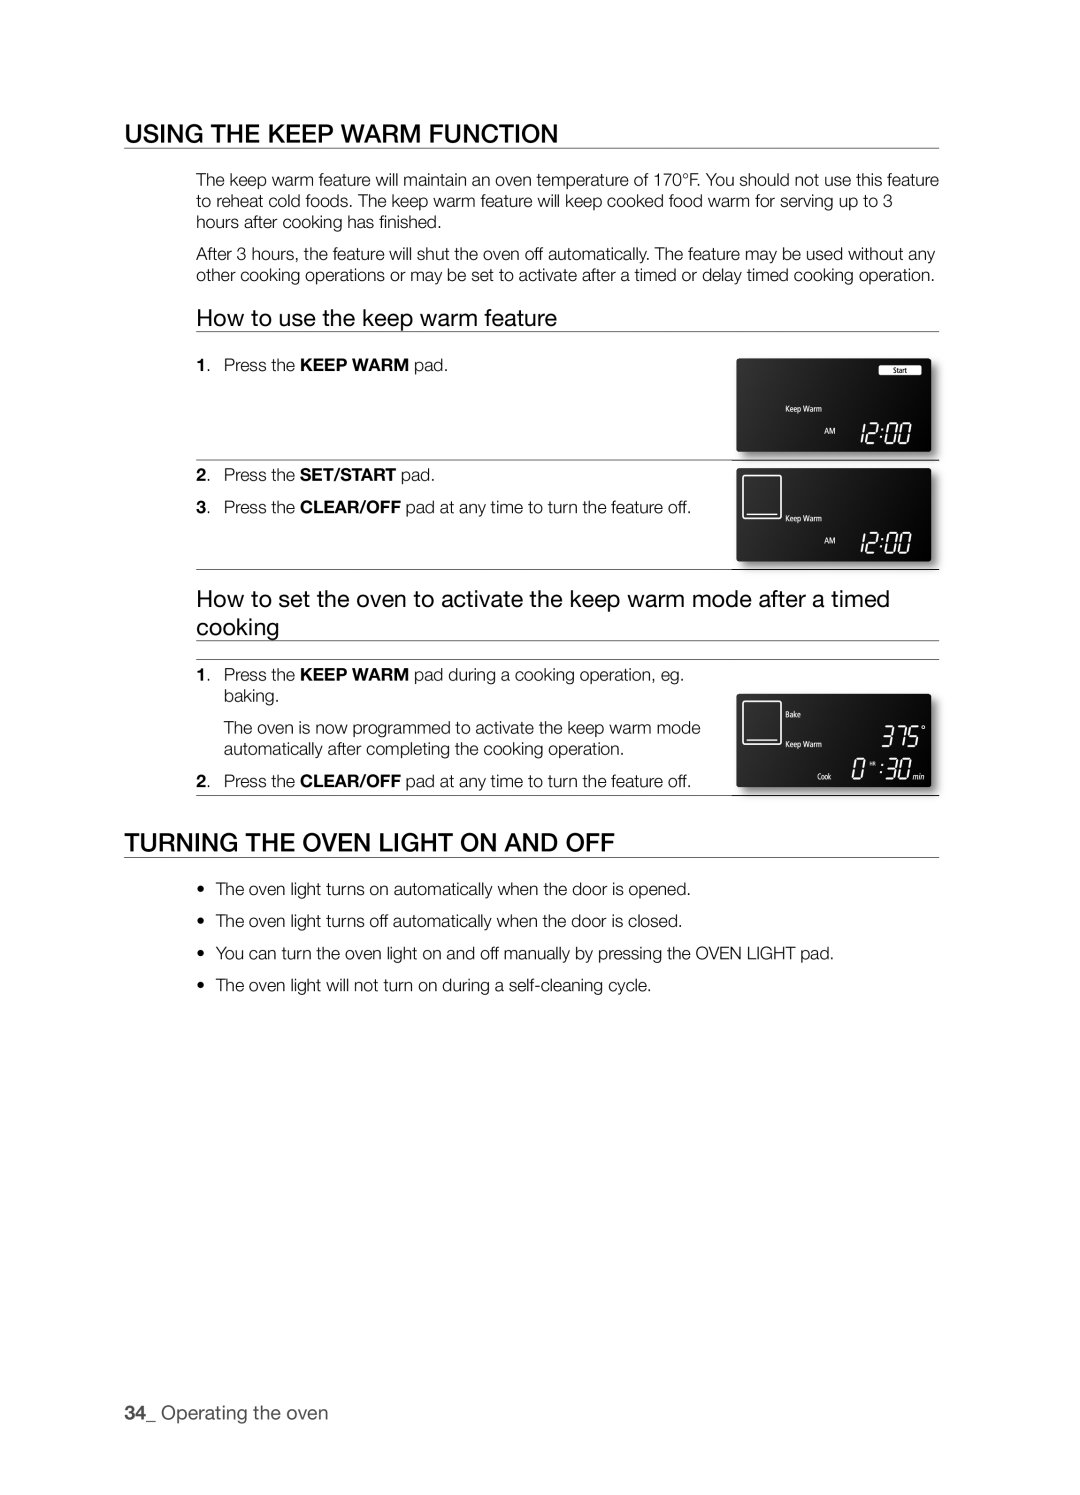 Samsung FTQ386LWUX Using The Keep Warm Function, Turning The Oven Light On And Off, How to use the keep warm feature 